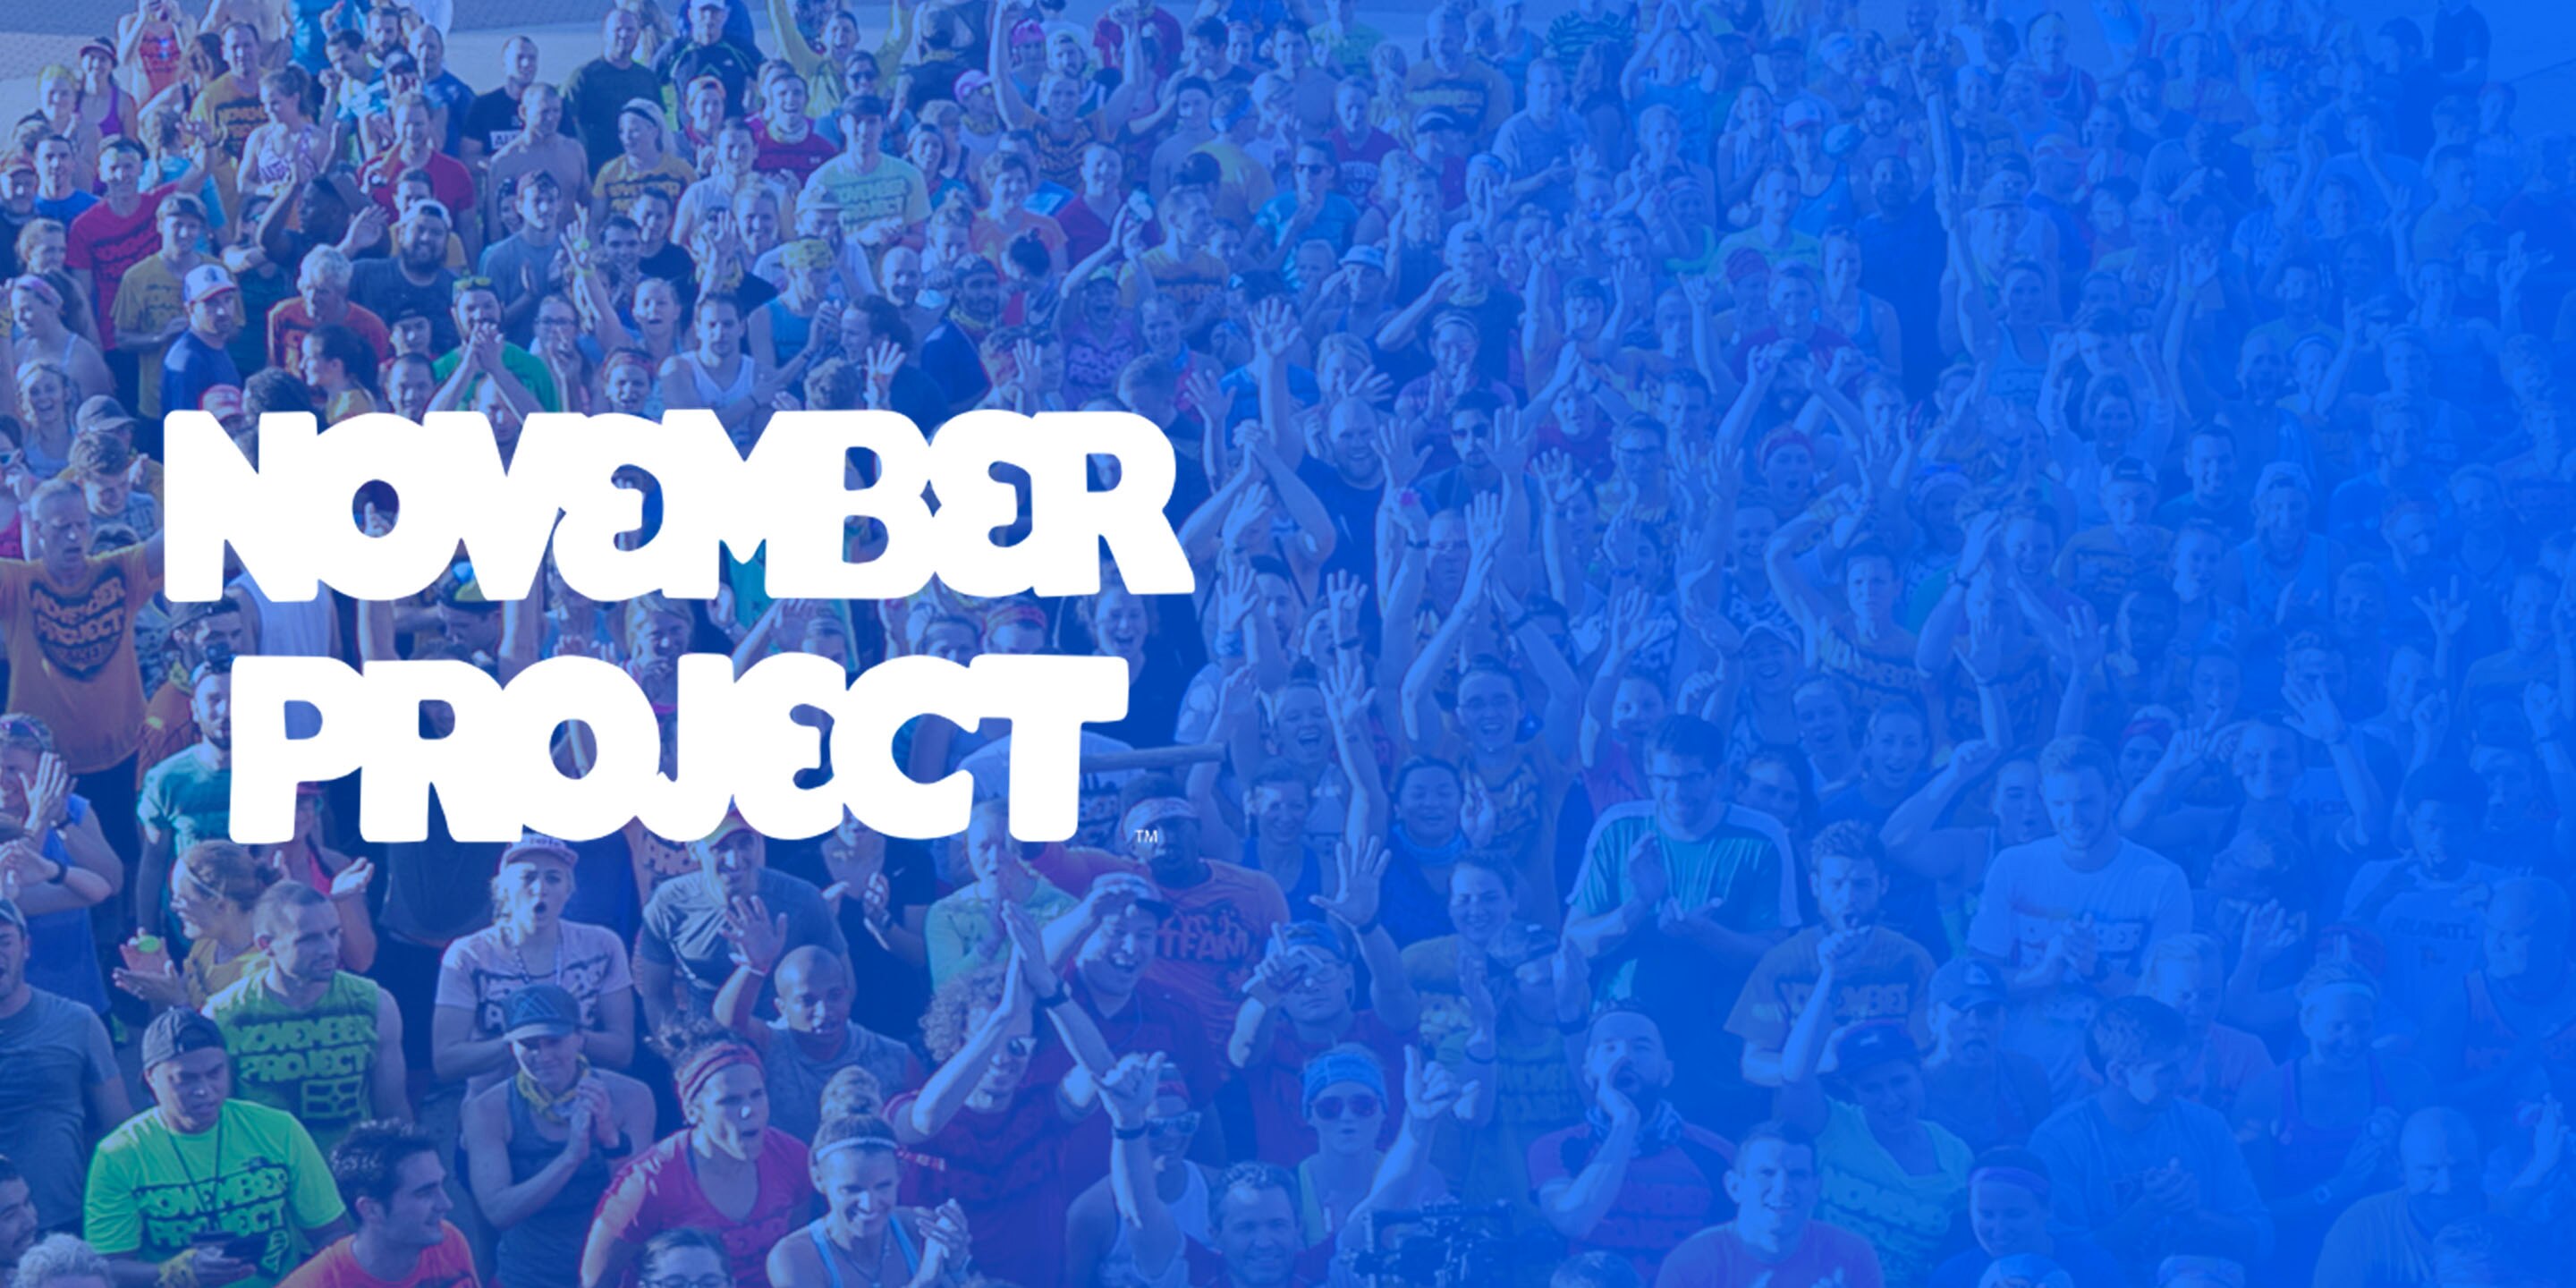 Text that reads 'November Project' over a picture of a crowd